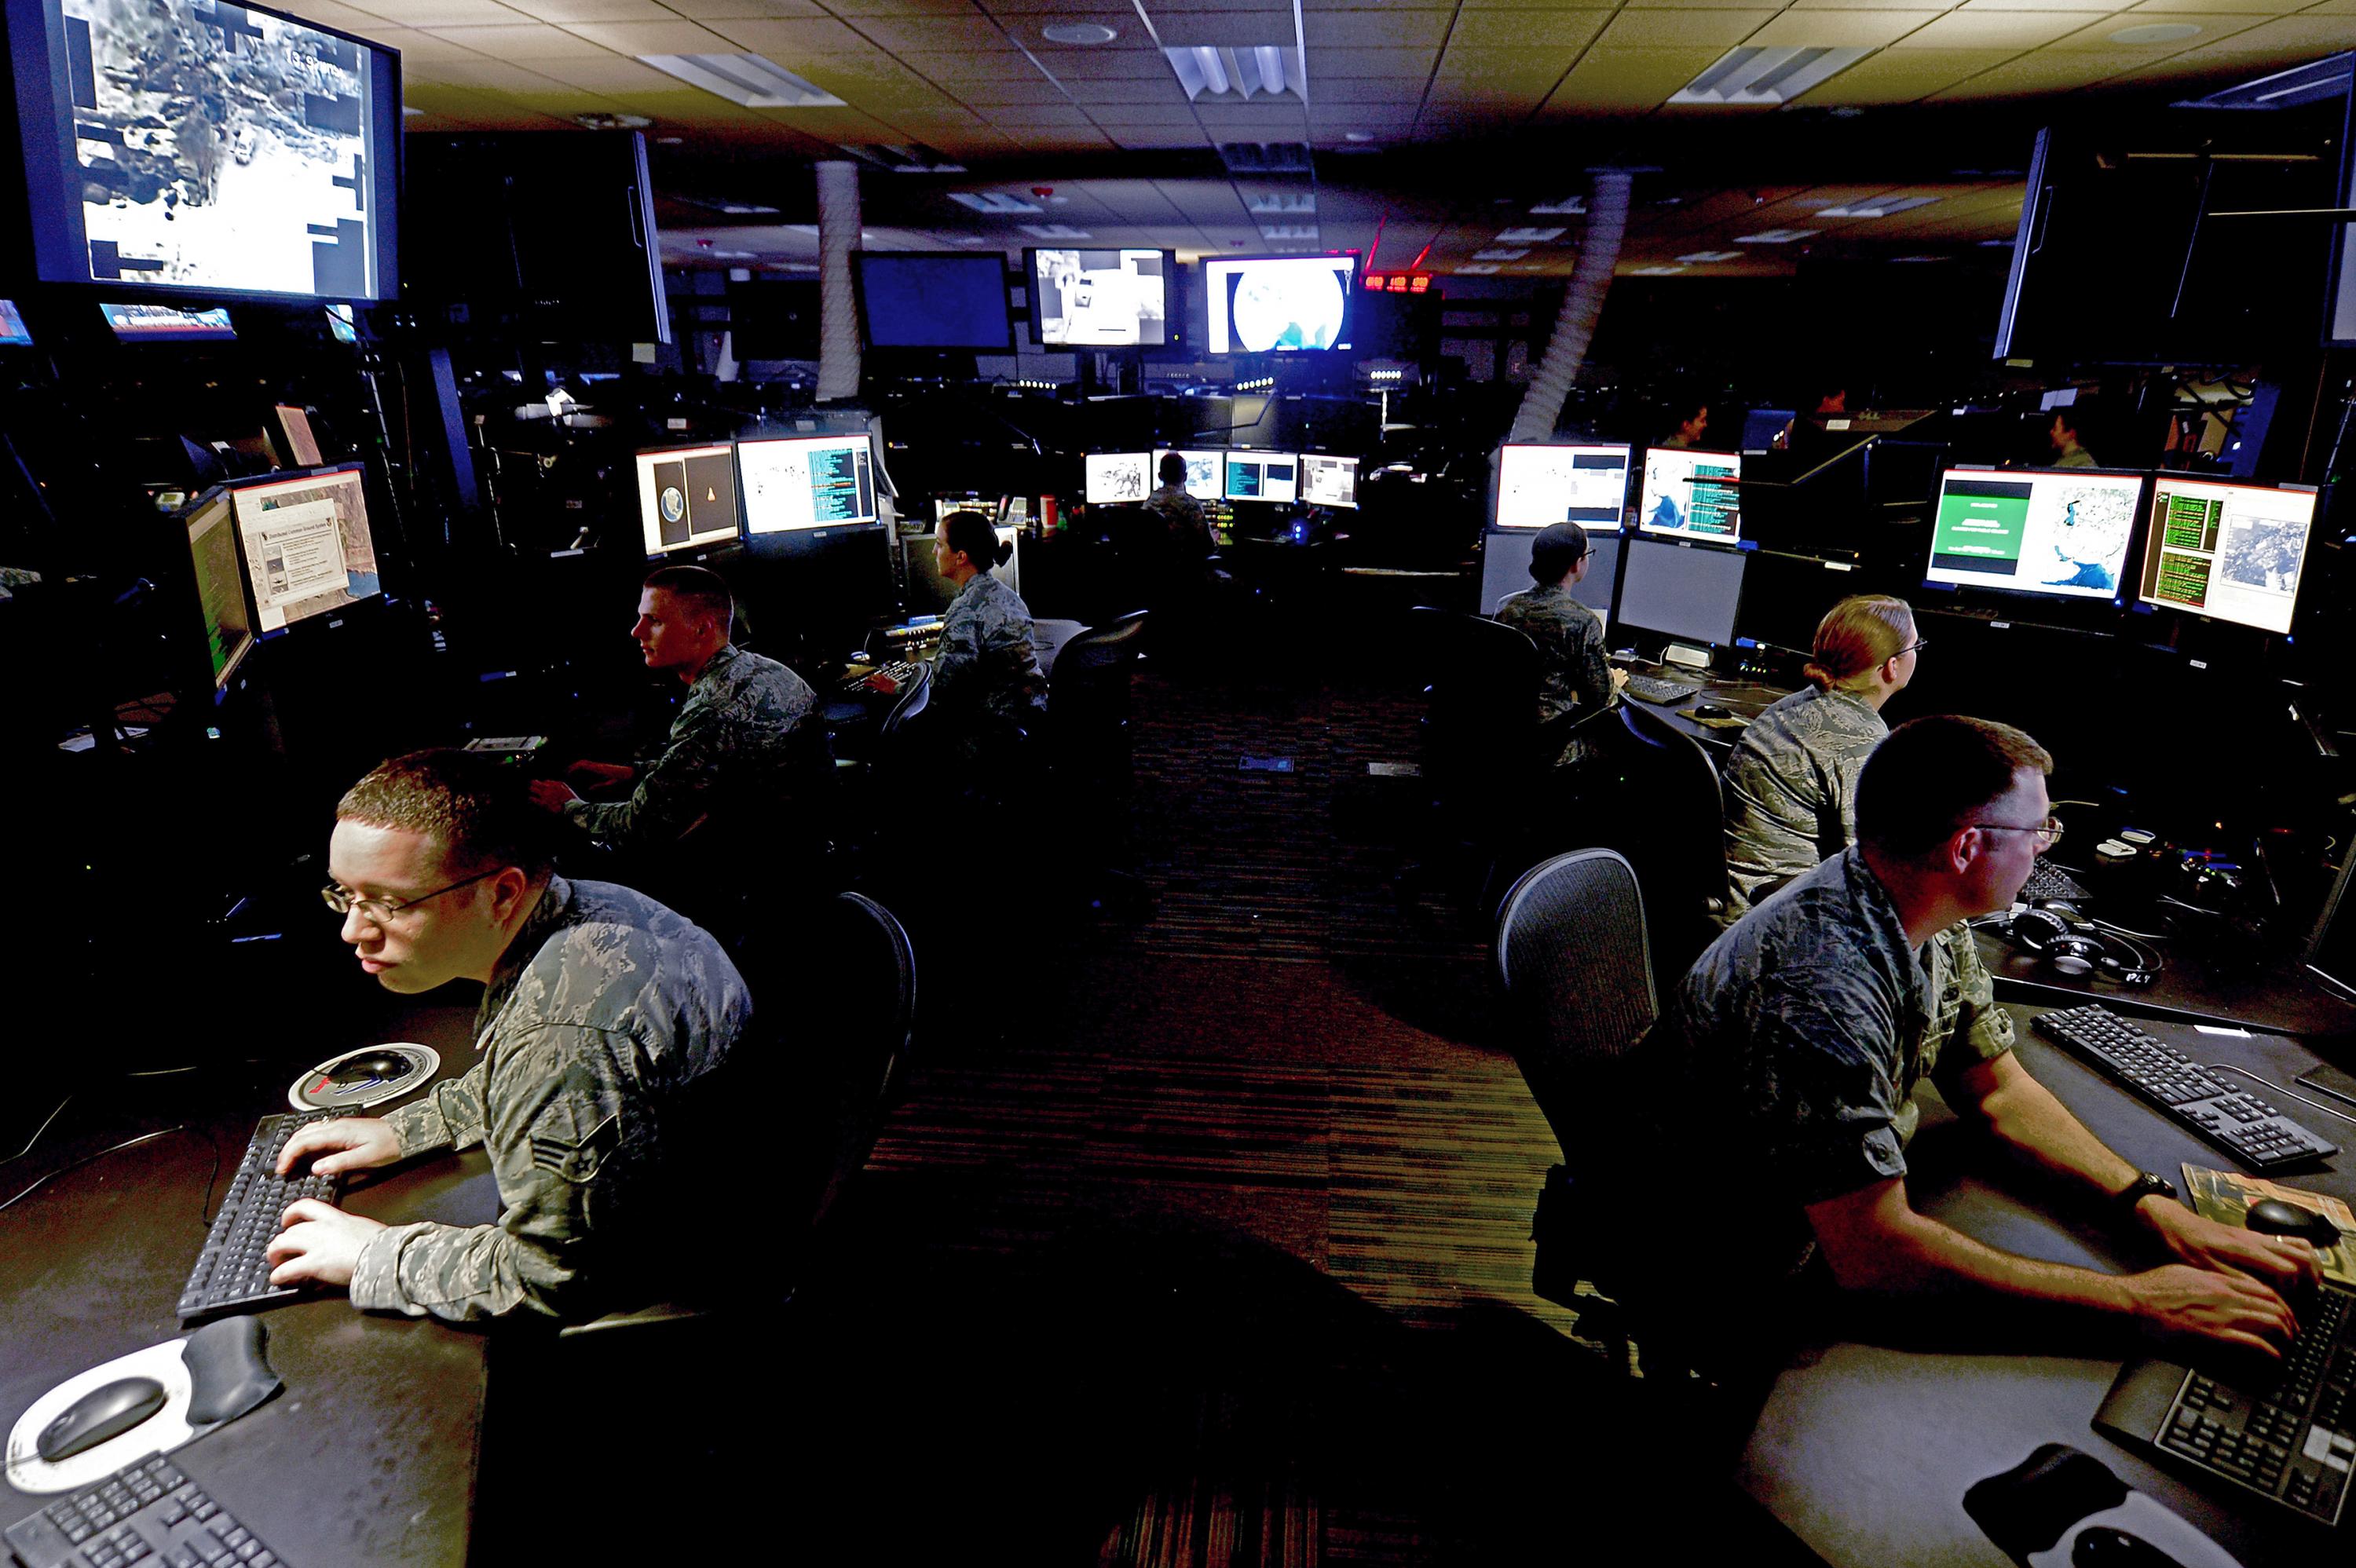 The Air Force Distributed Common Ground System (AF DCGS), also referred to as the AN/GSQ-272 SENTINEL weapon system, is the Air Force’s primary intelligence, surveillance, and reconnaissance (ISR) collection, processing, exploitation, analysis, and dissemination (CPAD) system. (U.S. Air Force photo)